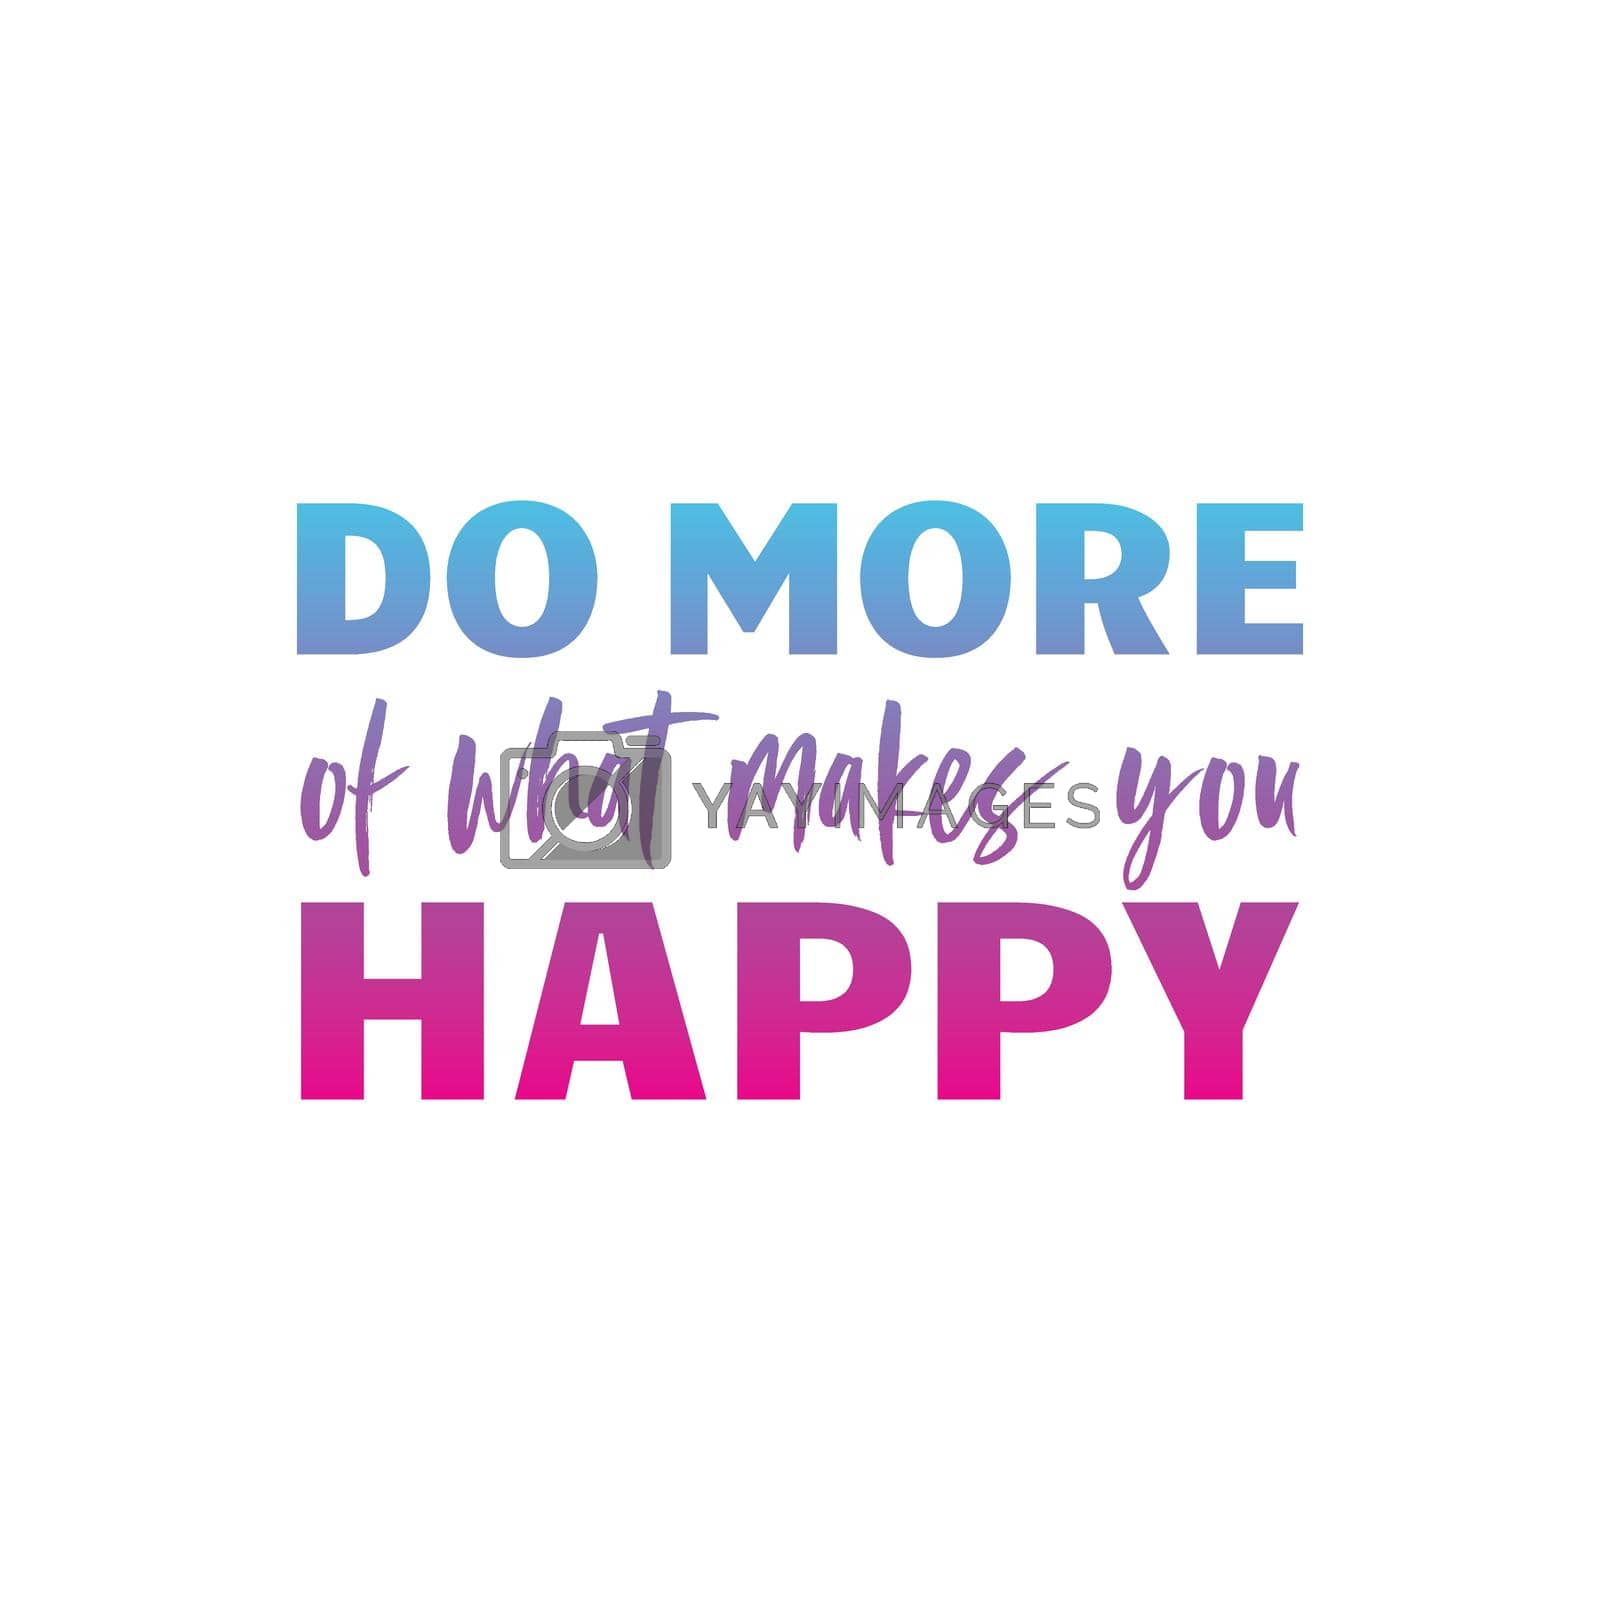 Royalty free image of DO MORE of what makes you HAPPY quote by elinnet